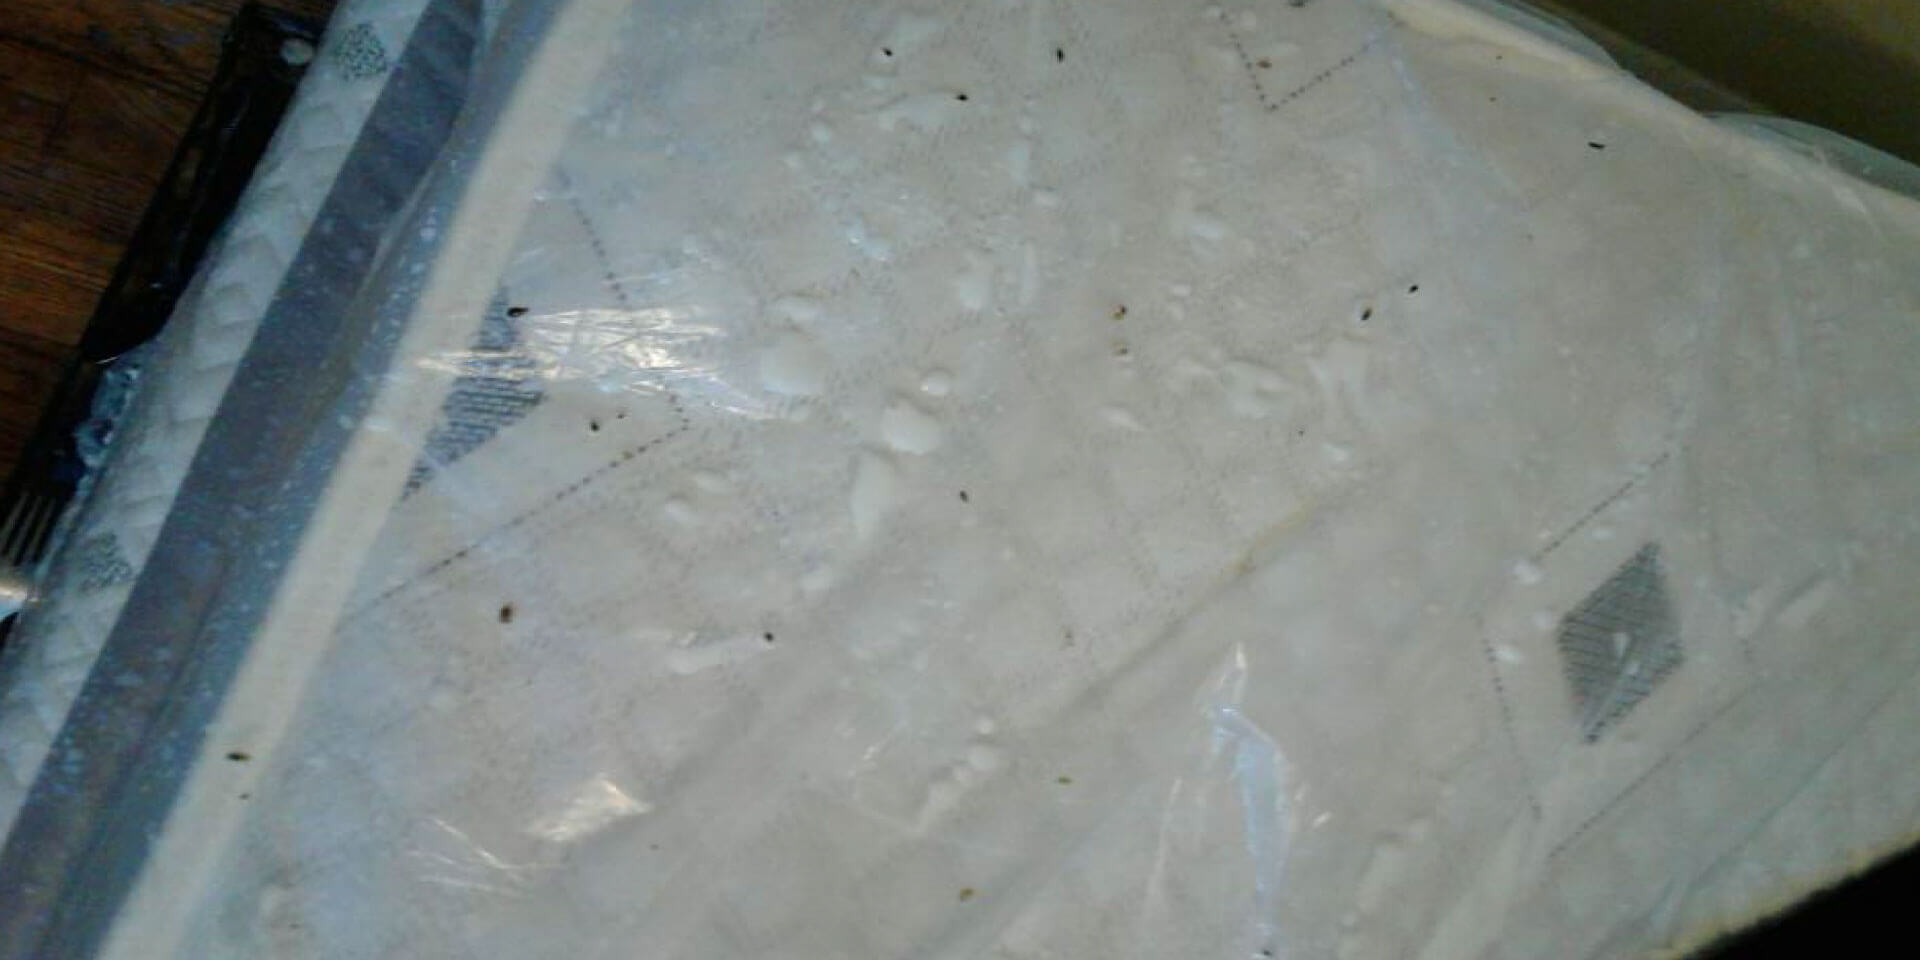 bed bugs on a mattress near baltimore md